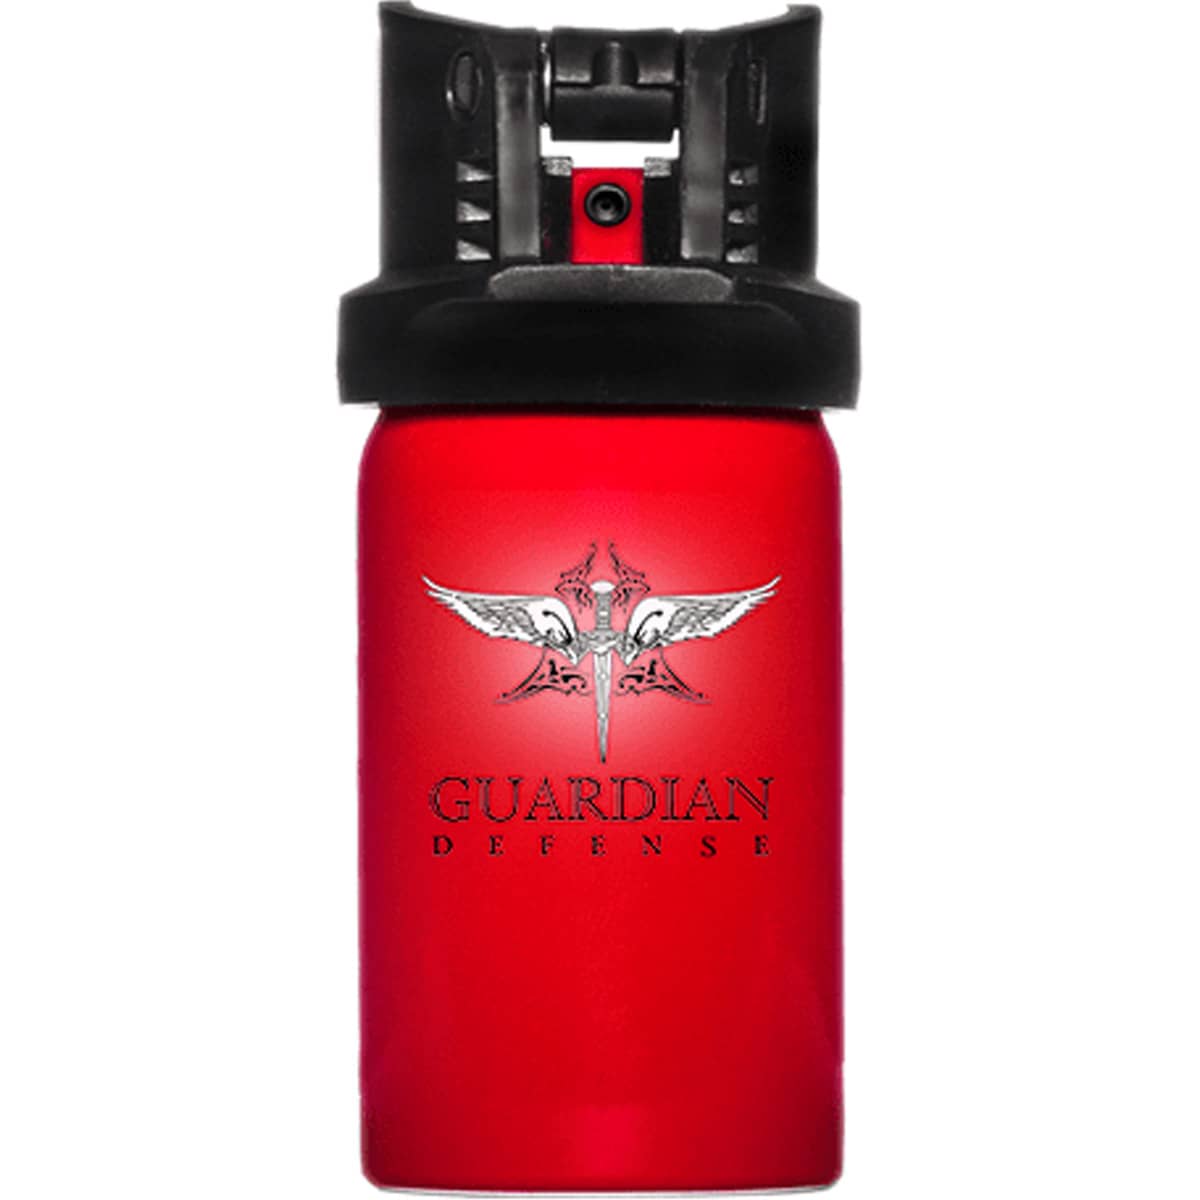 Guardian Defence Pepper Spray 30ml